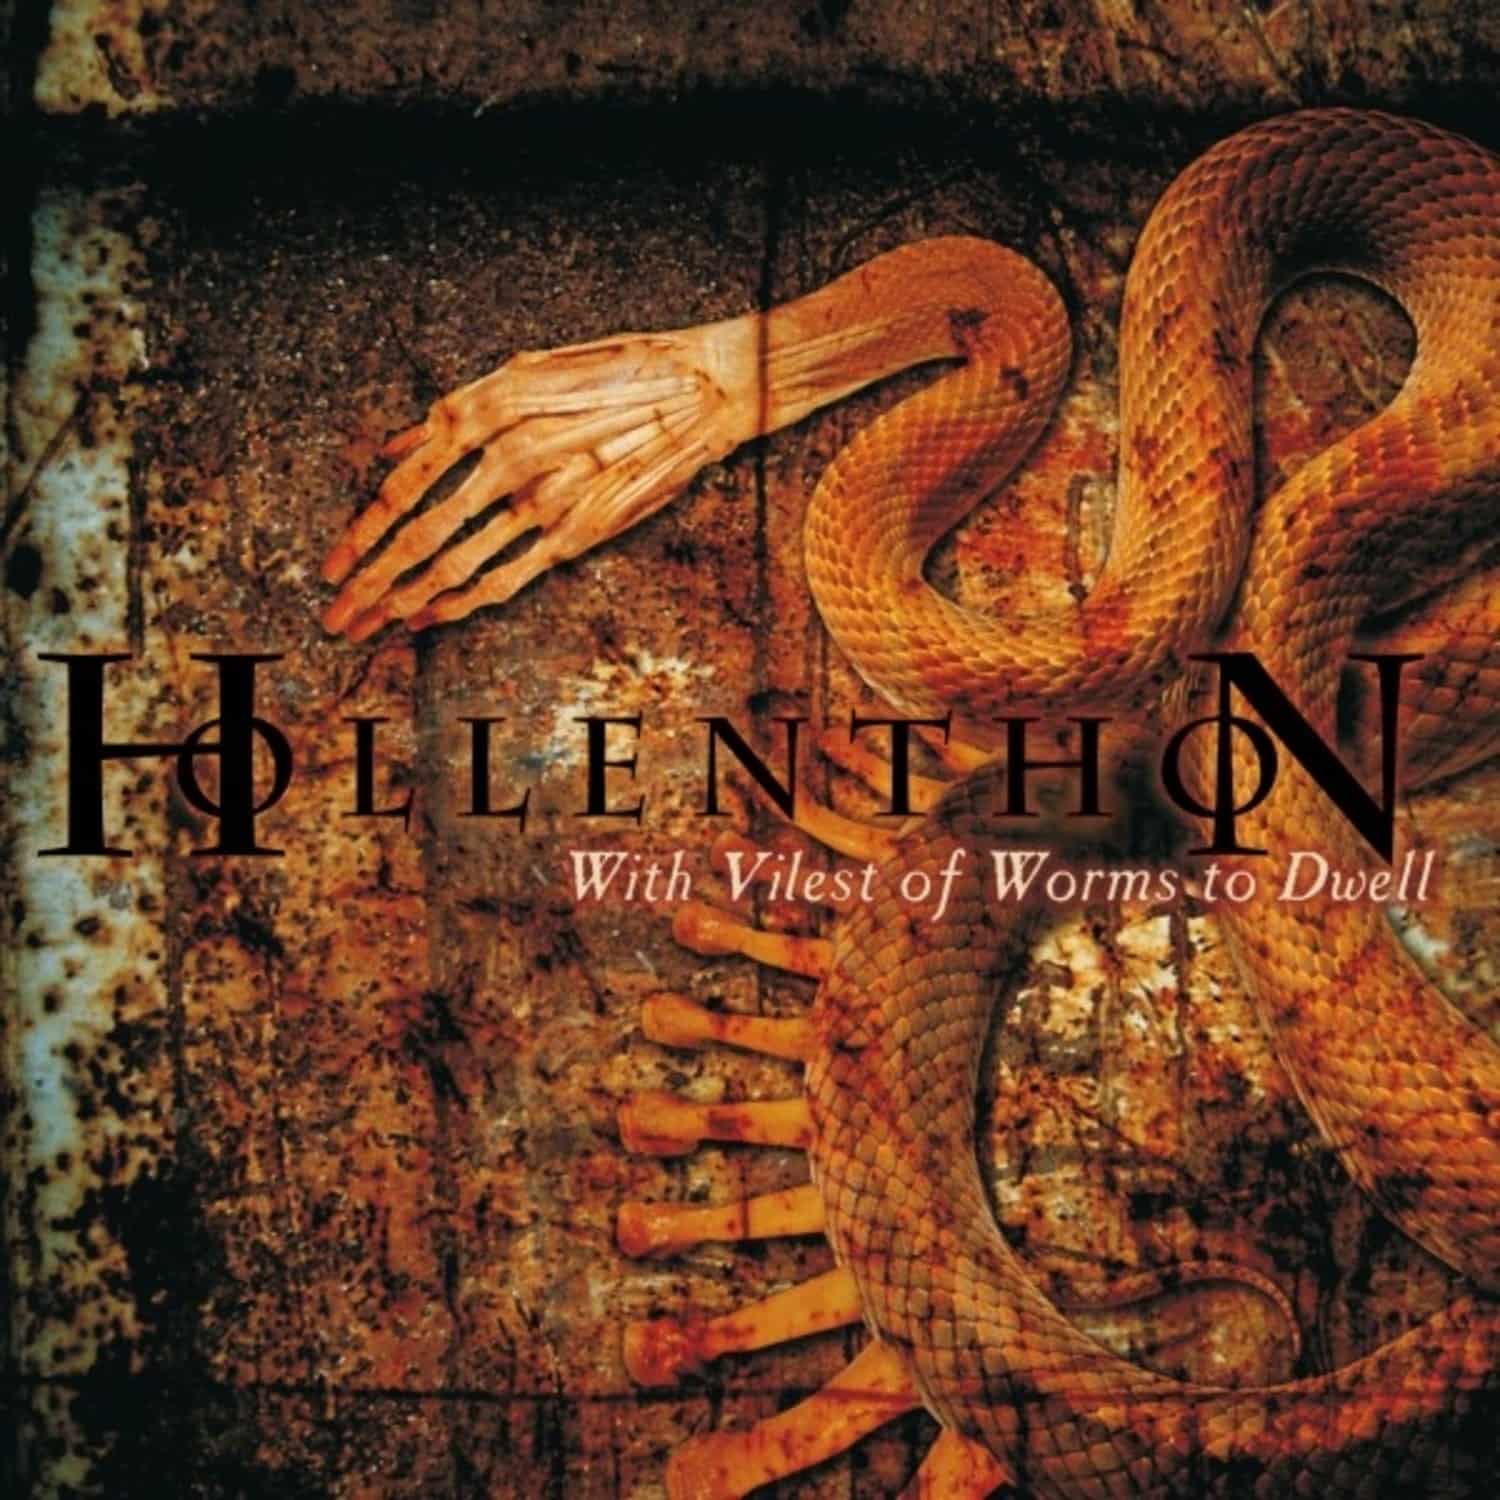 Hollenthon - WITH VILEST OF WORMS TO DWELL 